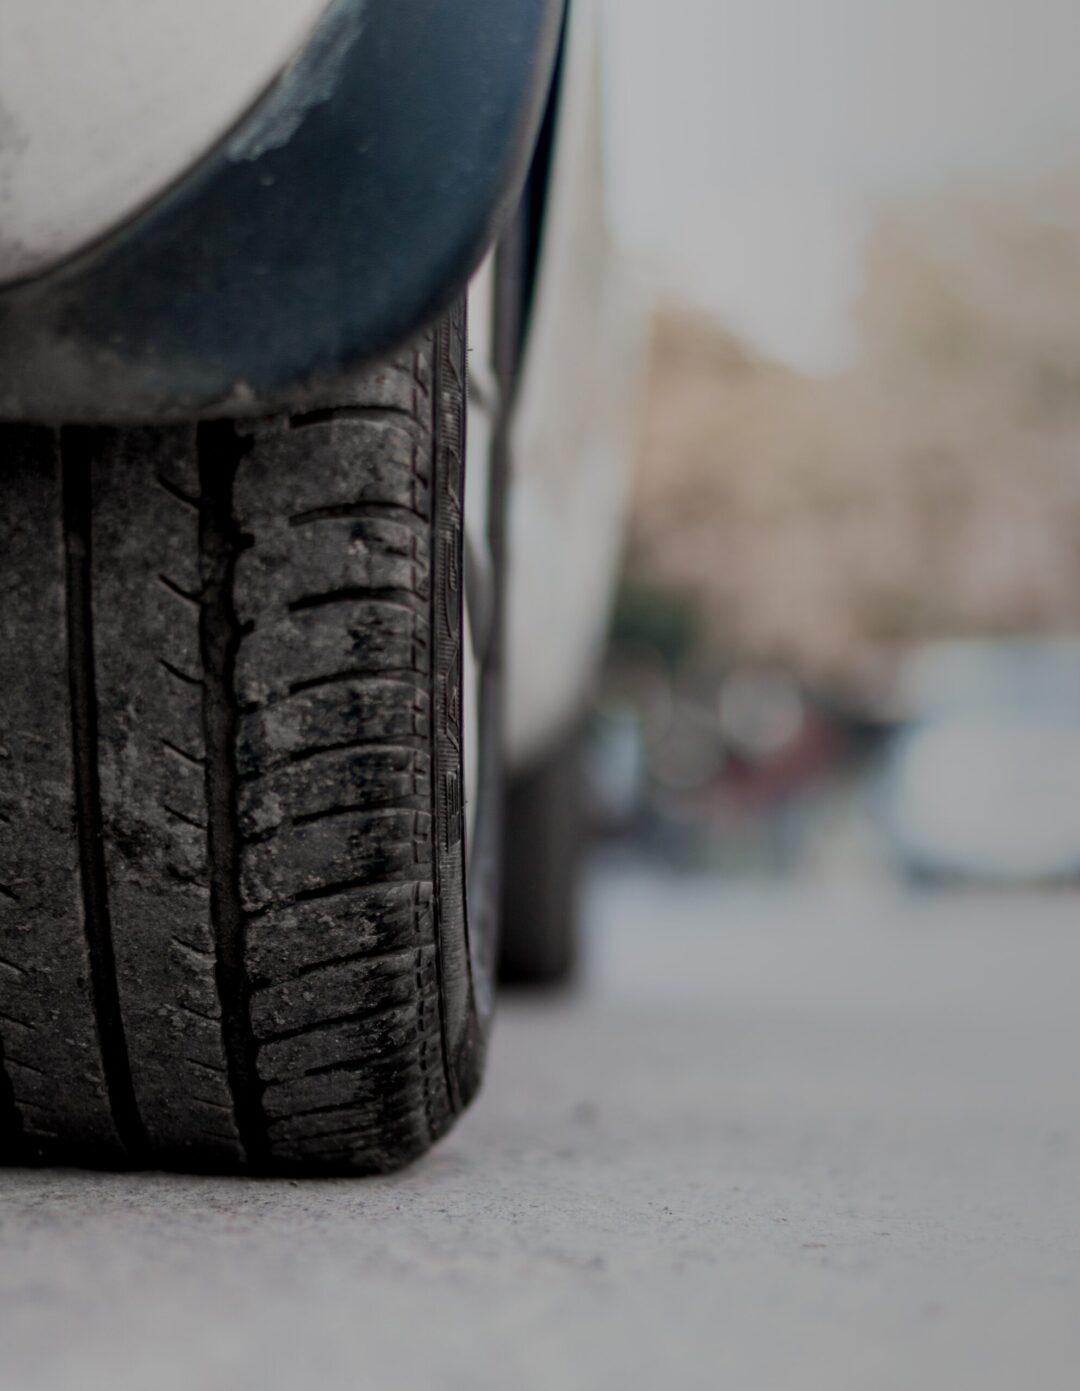 Tyres are often the most neglected things in our cars, but we should take better care of them, including changing them periodically. When should I replace my car tyres? Read on to find out more!